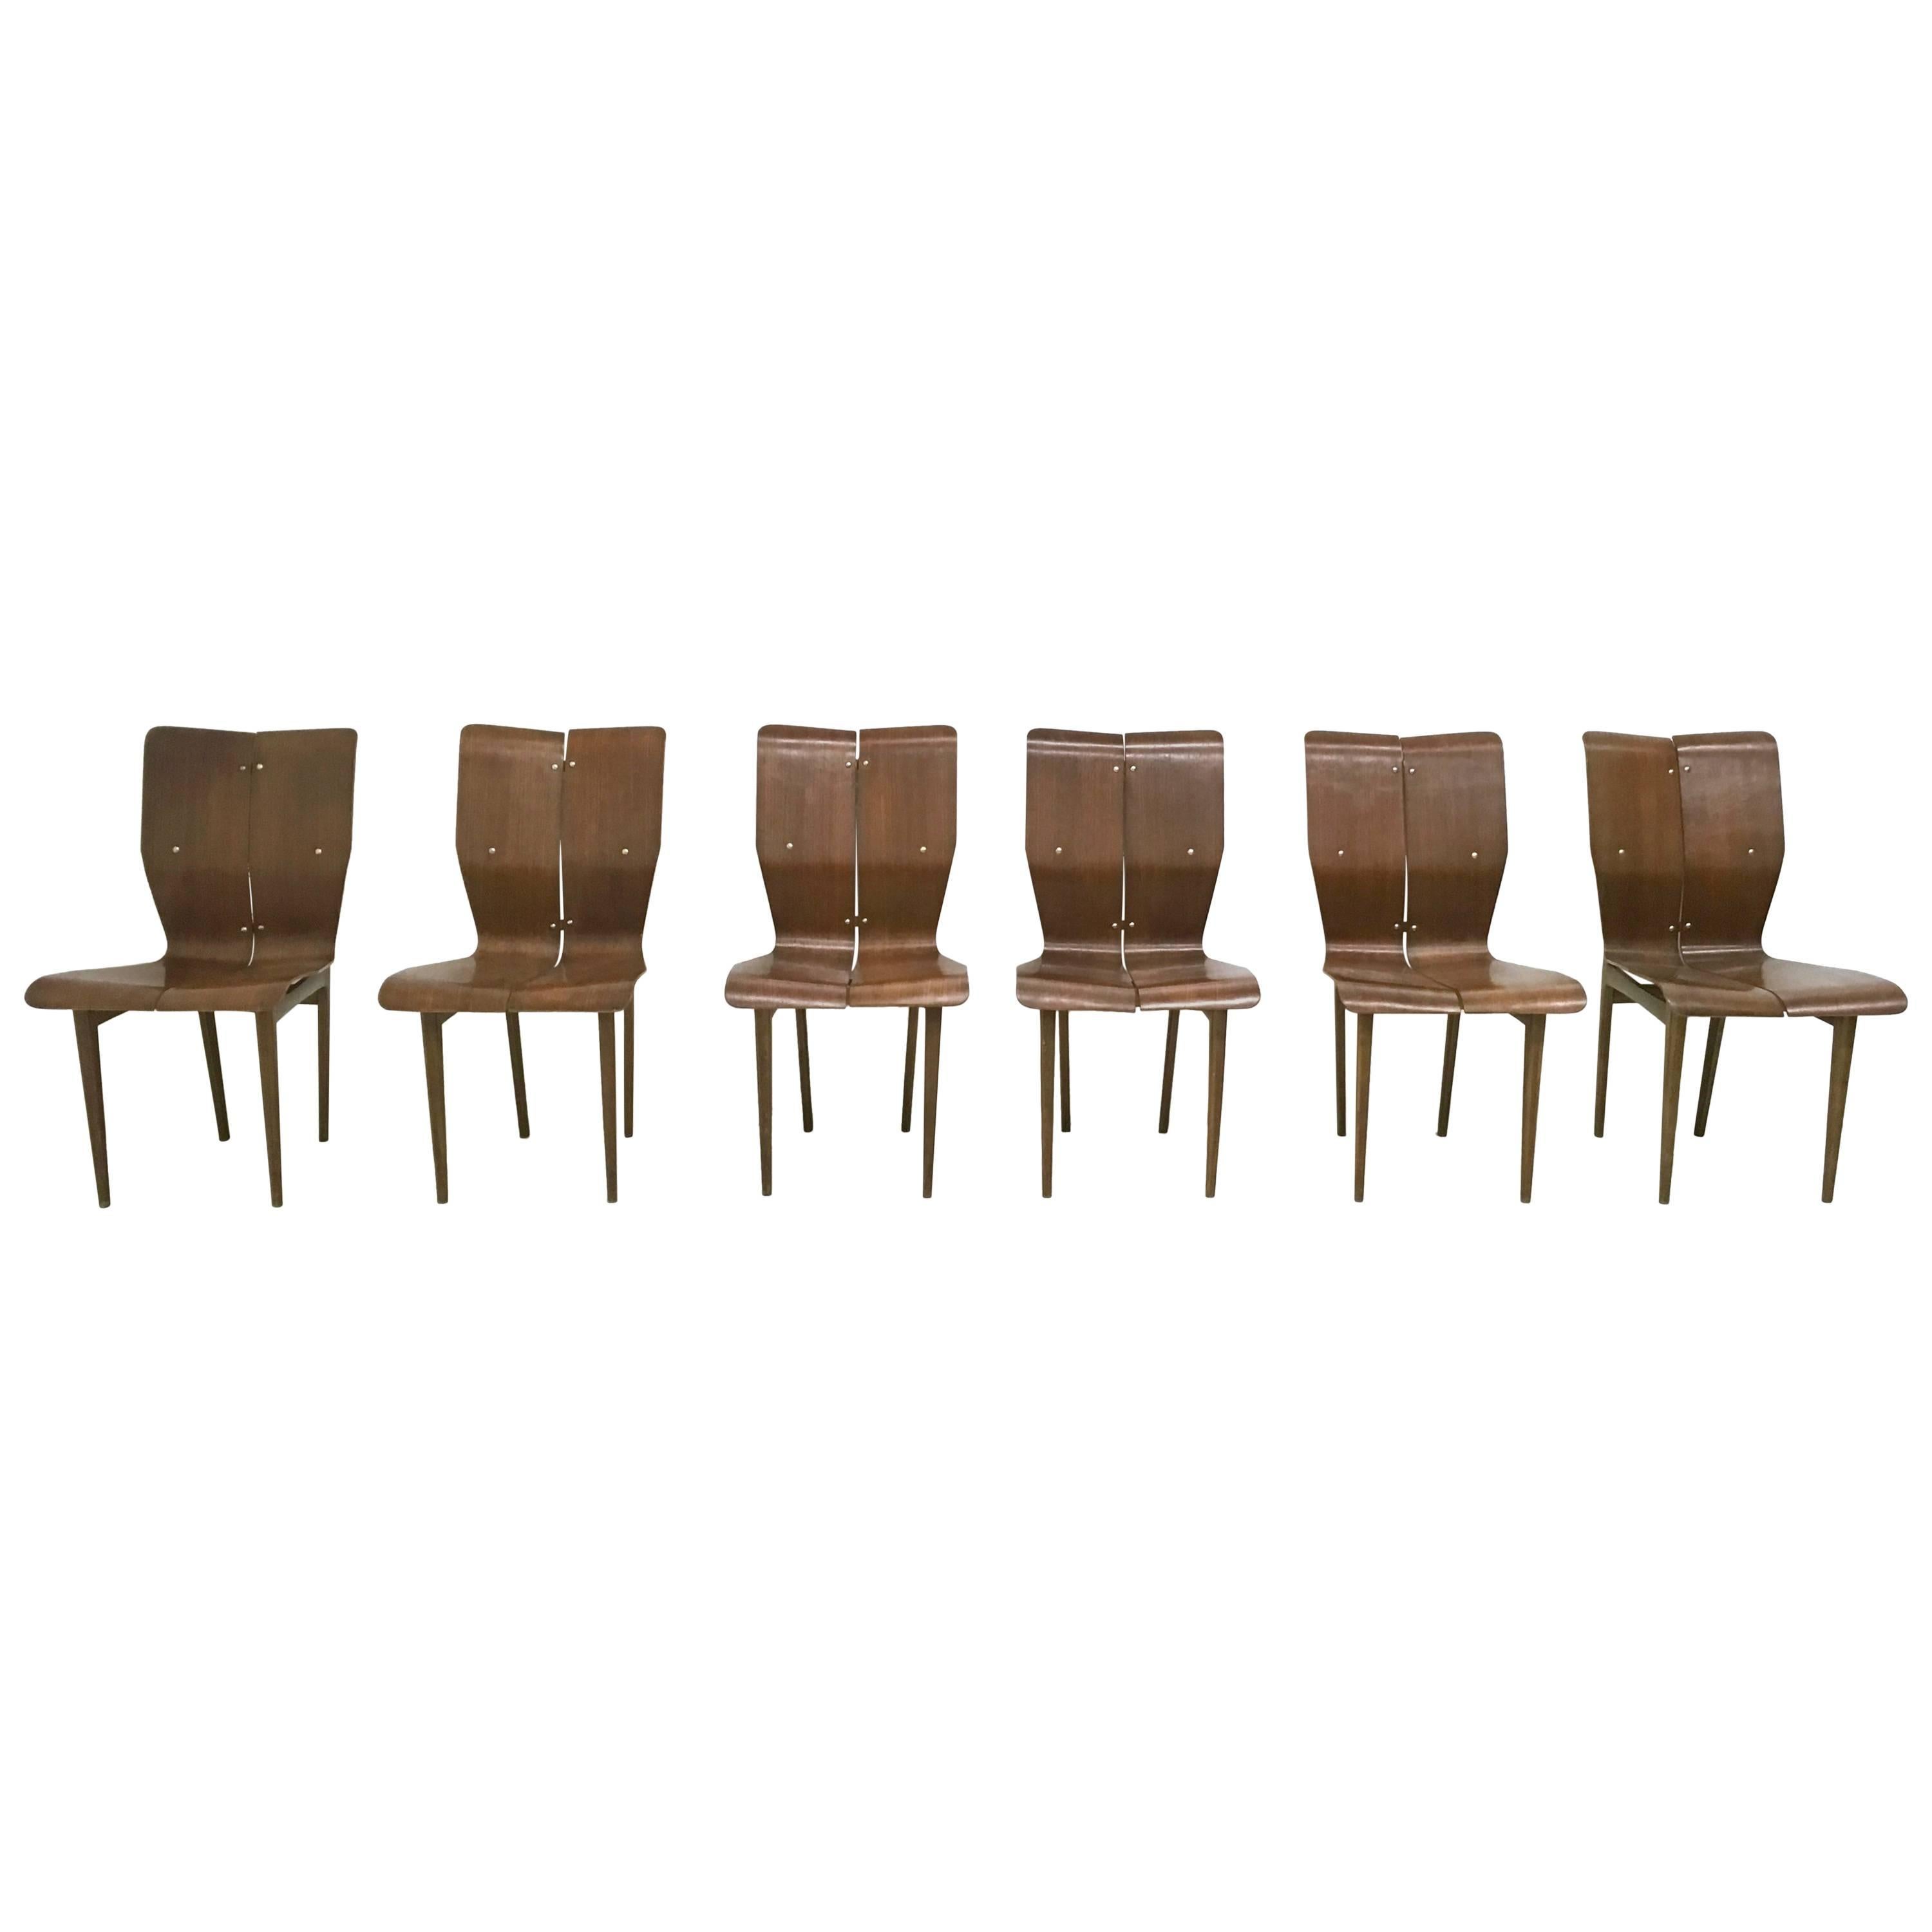 Set of Six Midcentury Curved Wood Chairs in the Style of Tapiovaara, Finland